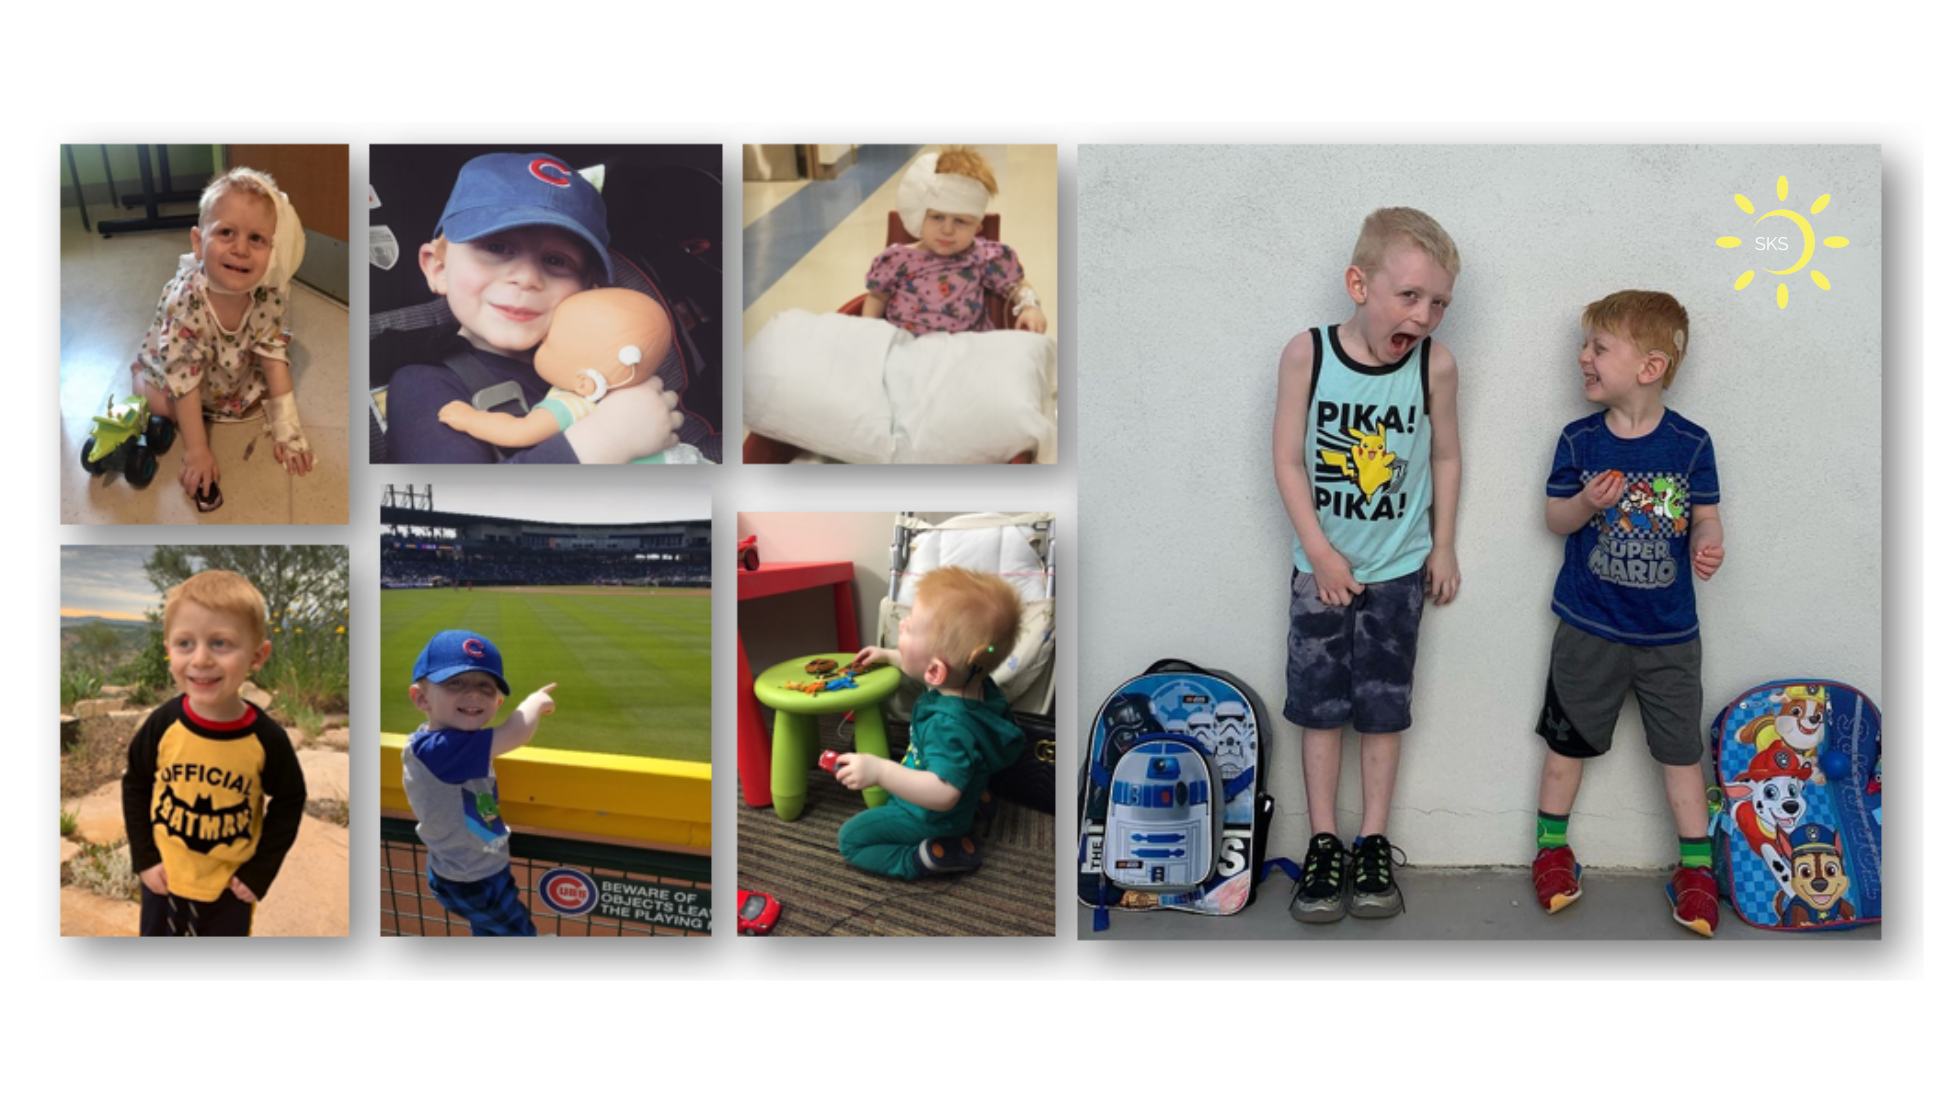 A collage of joyful moments from JJ Walsh's life, a brave child with Smith-Kingsmore Syndrome, showcasing his vibrant spirit.